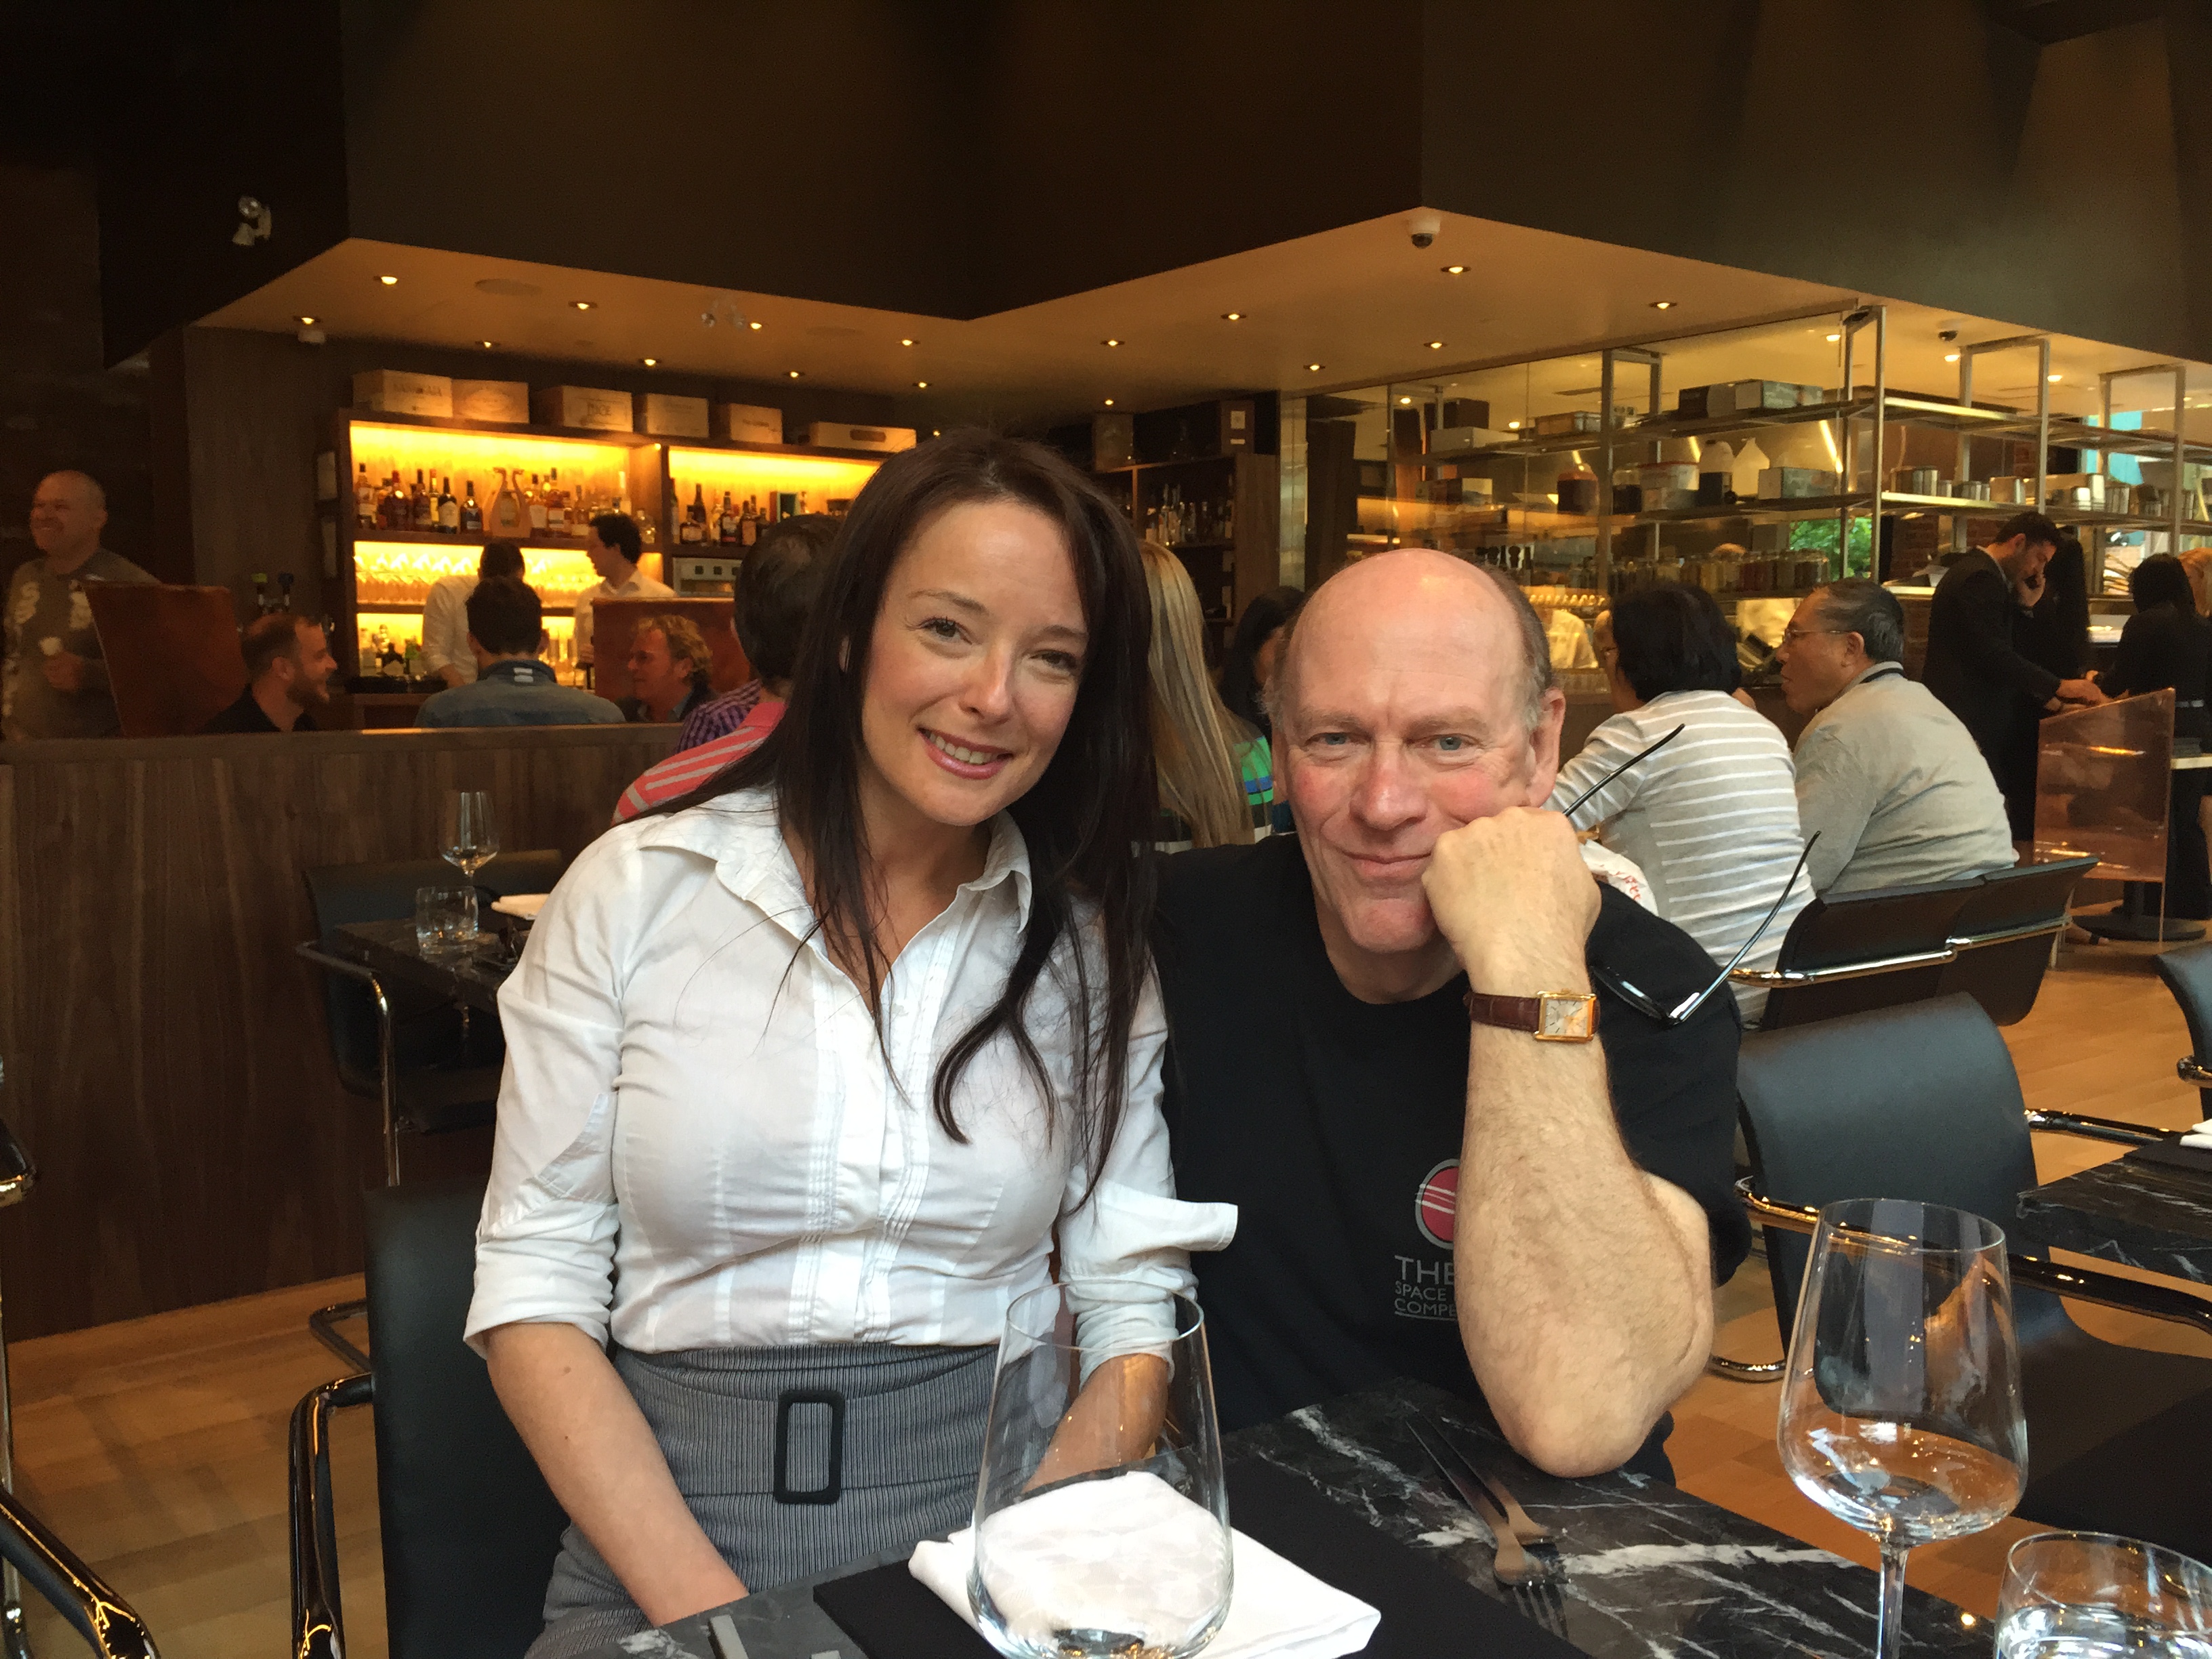 LaTiesha Fazakas and Randall Perry, producers of Space Games at Uwe Boll's new Bauhaus Restaurant, Vancouver, BC.